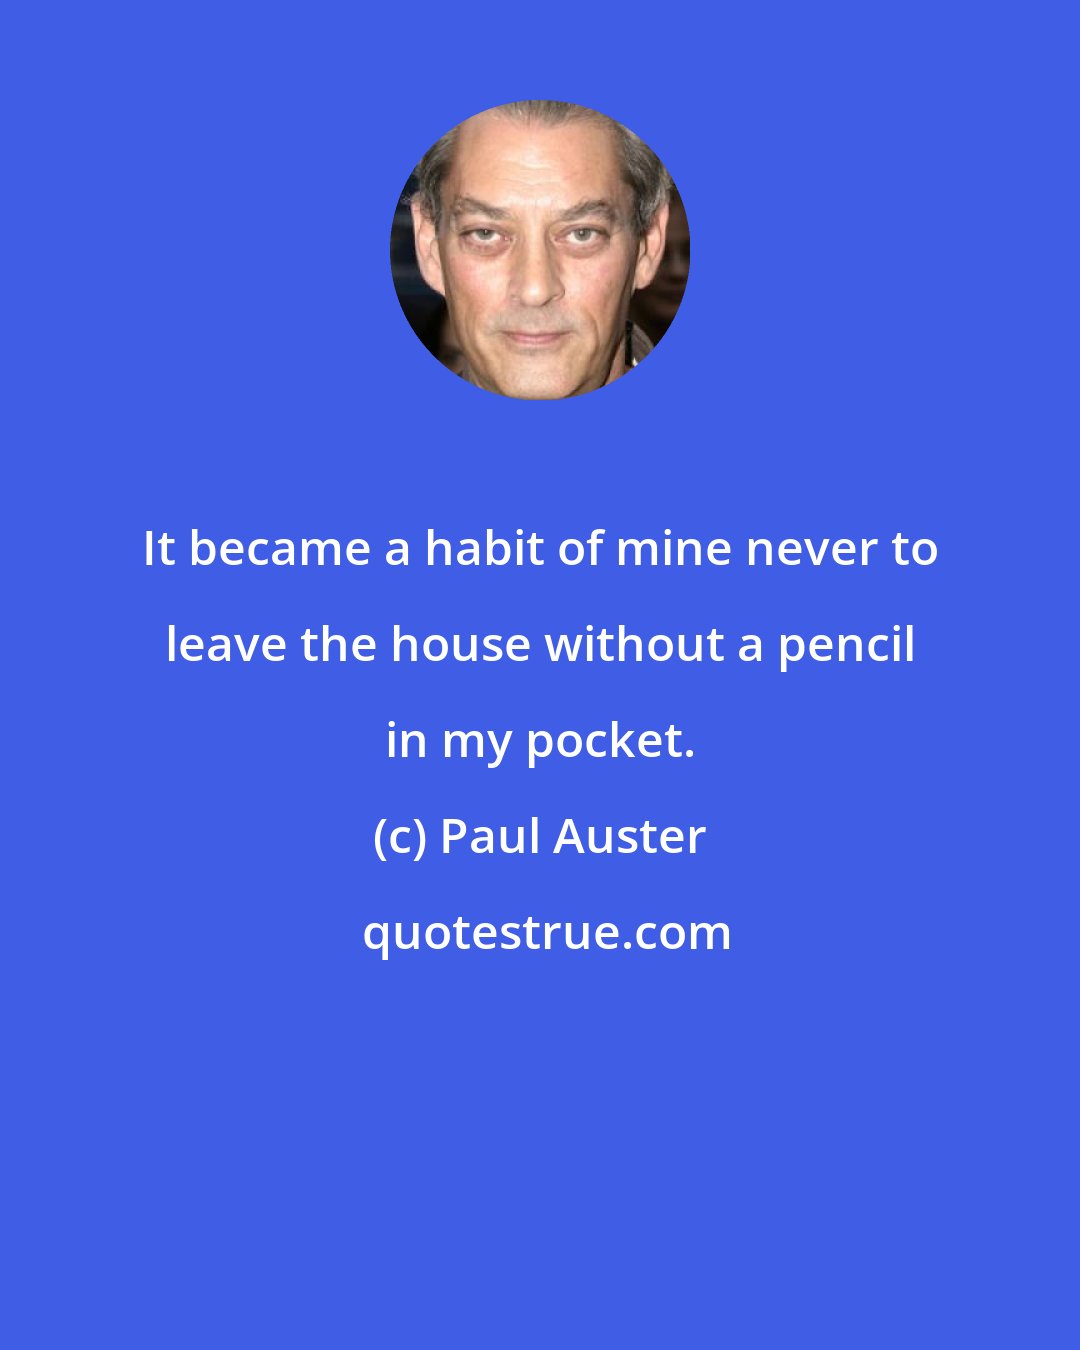 Paul Auster: It became a habit of mine never to leave the house without a pencil in my pocket.